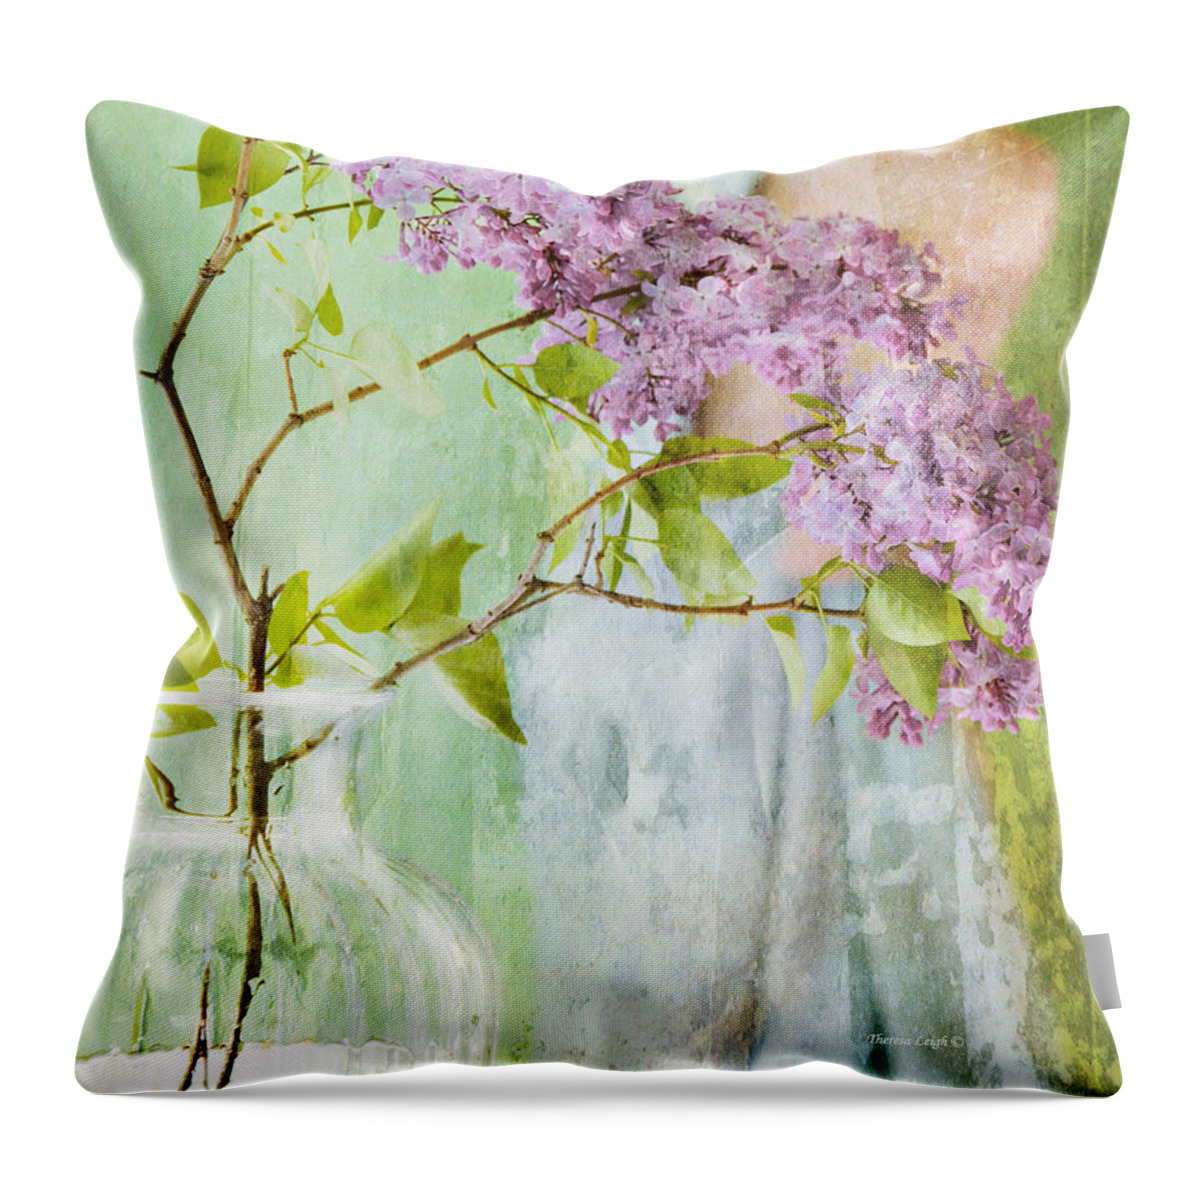 Lilacs Throw Pillow featuring the photograph The Scent Of Lilacs by Theresa Tahara